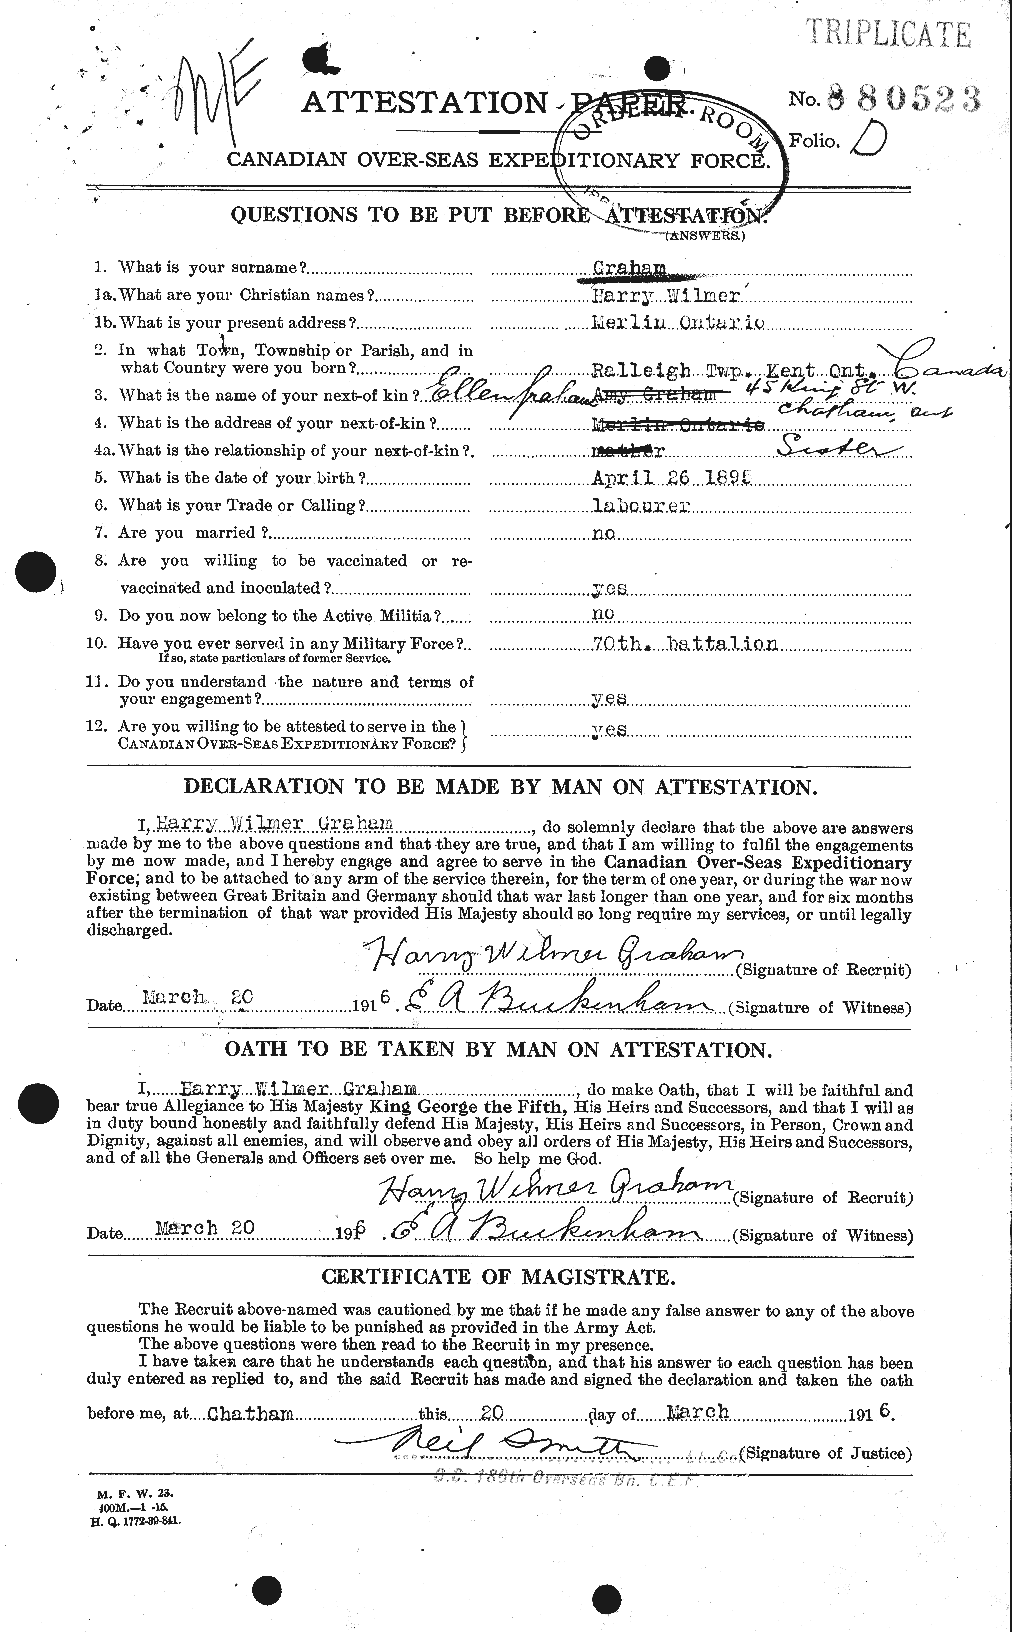 Personnel Records of the First World War - CEF 357724a